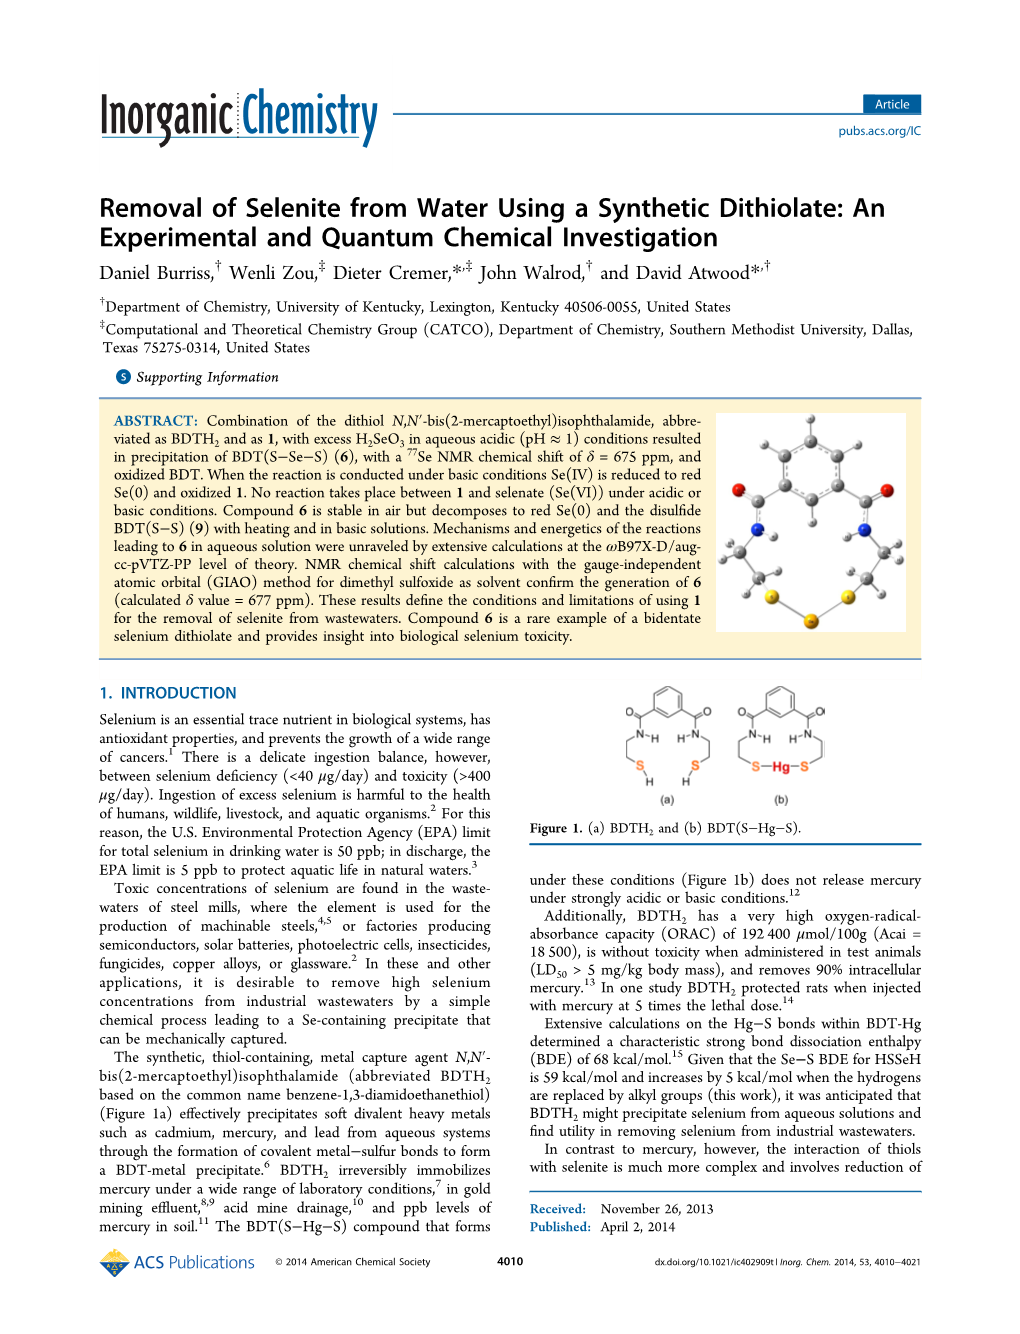 Removal of Selenite from Water Using a Synthetic Dithiolate: An